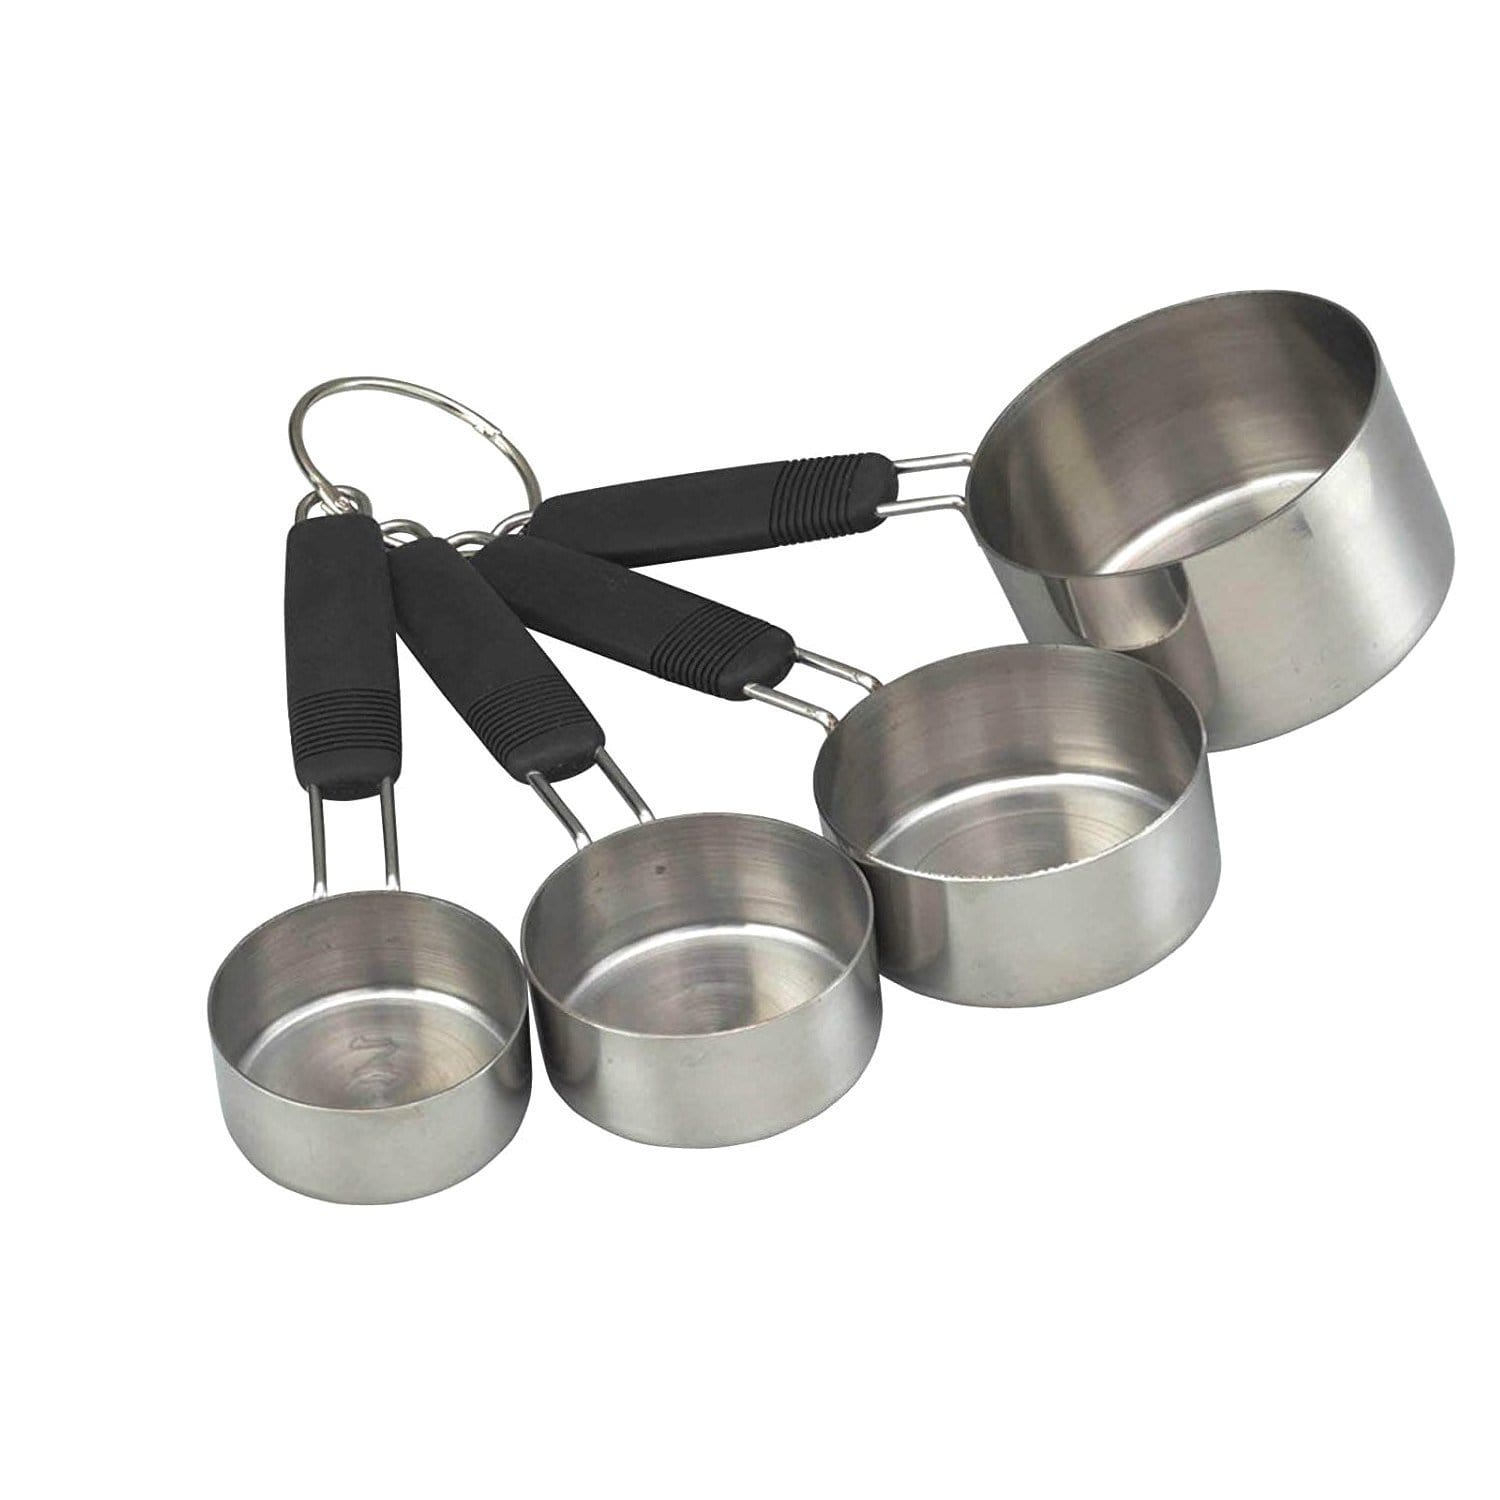 KitchenCraft Measuring Cup Set - Silver and Black, 4 - Piece - KCPROCUPSET - Jashanmal Home